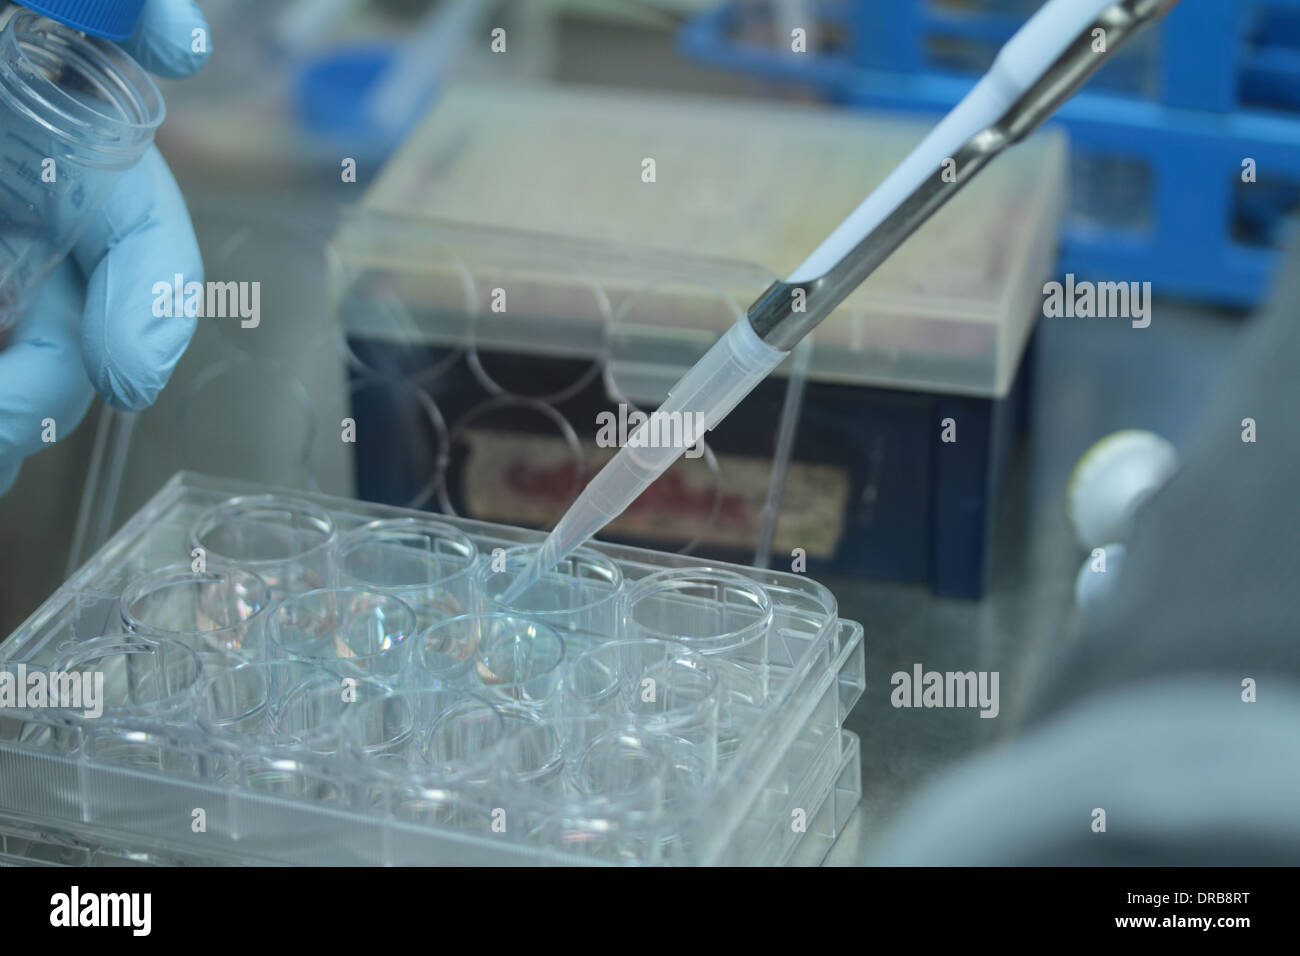 person a hand withe glove pipetting in multi titer plate Stock Photo